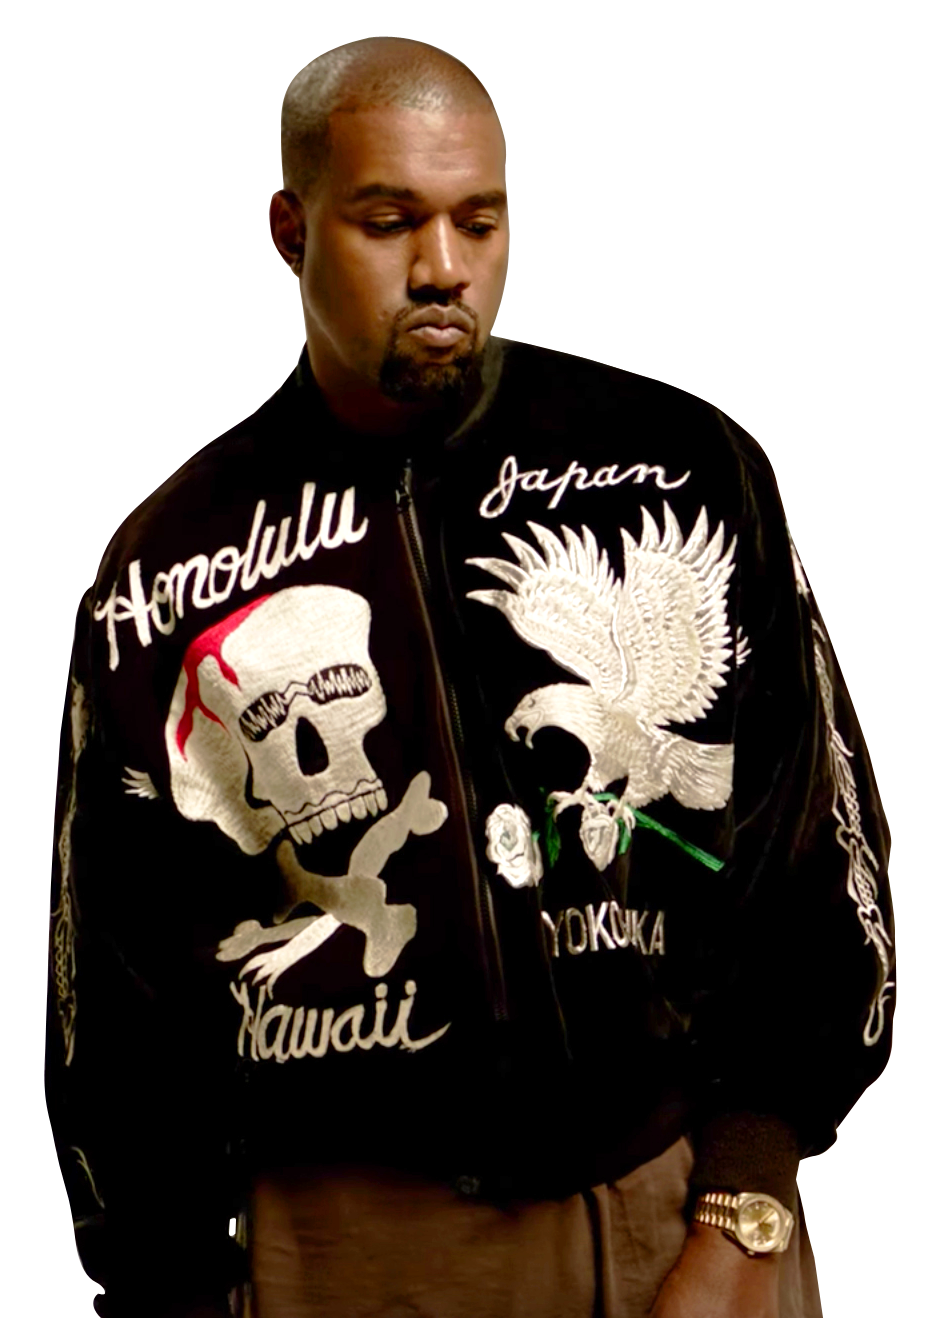 A Man In A Black Jacket With White Skulls And A Skull On It